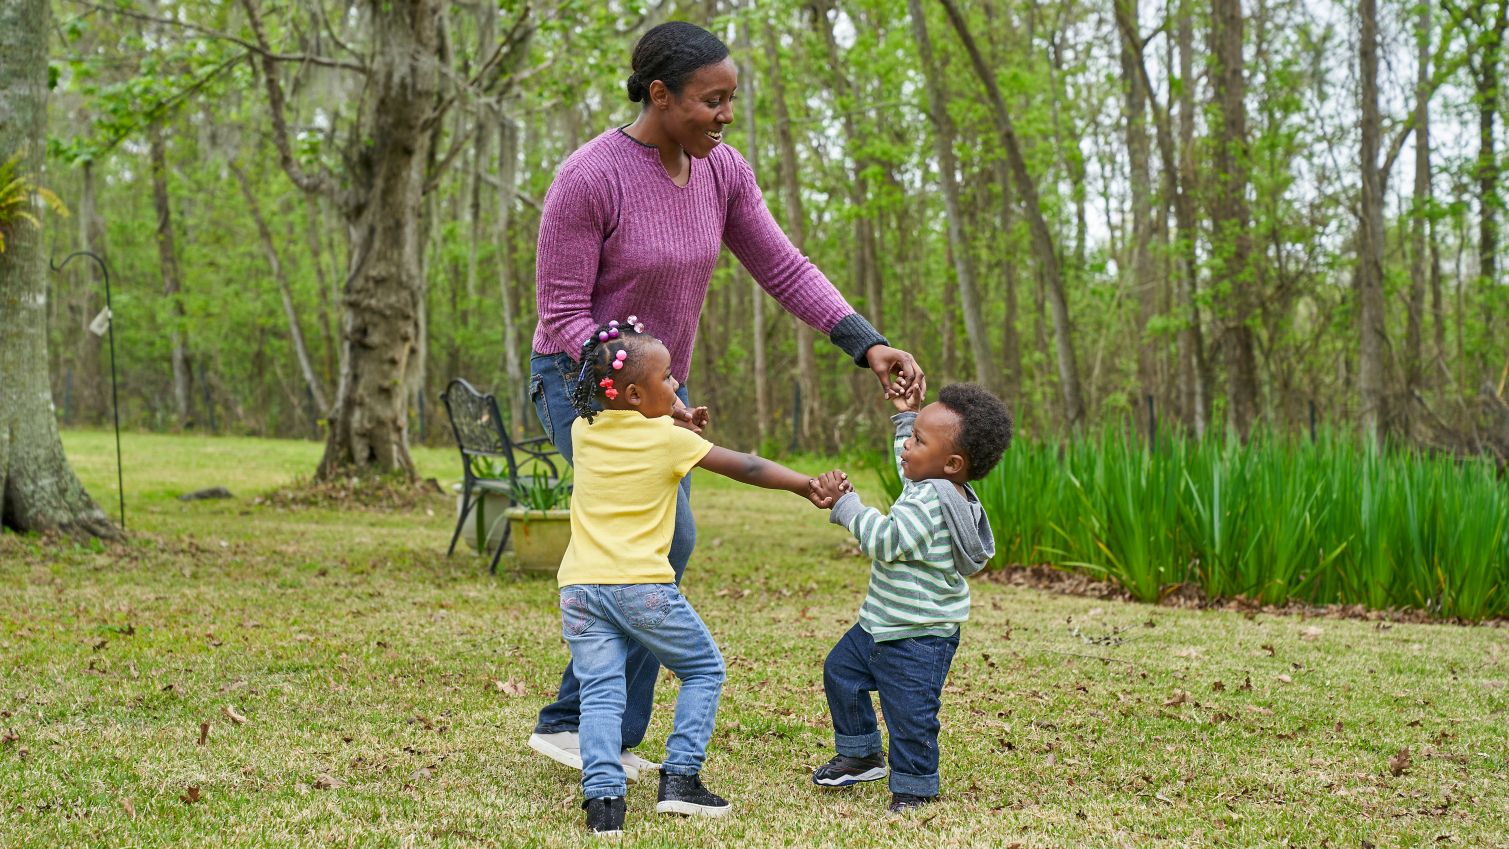 Woman with two small children play outdoors